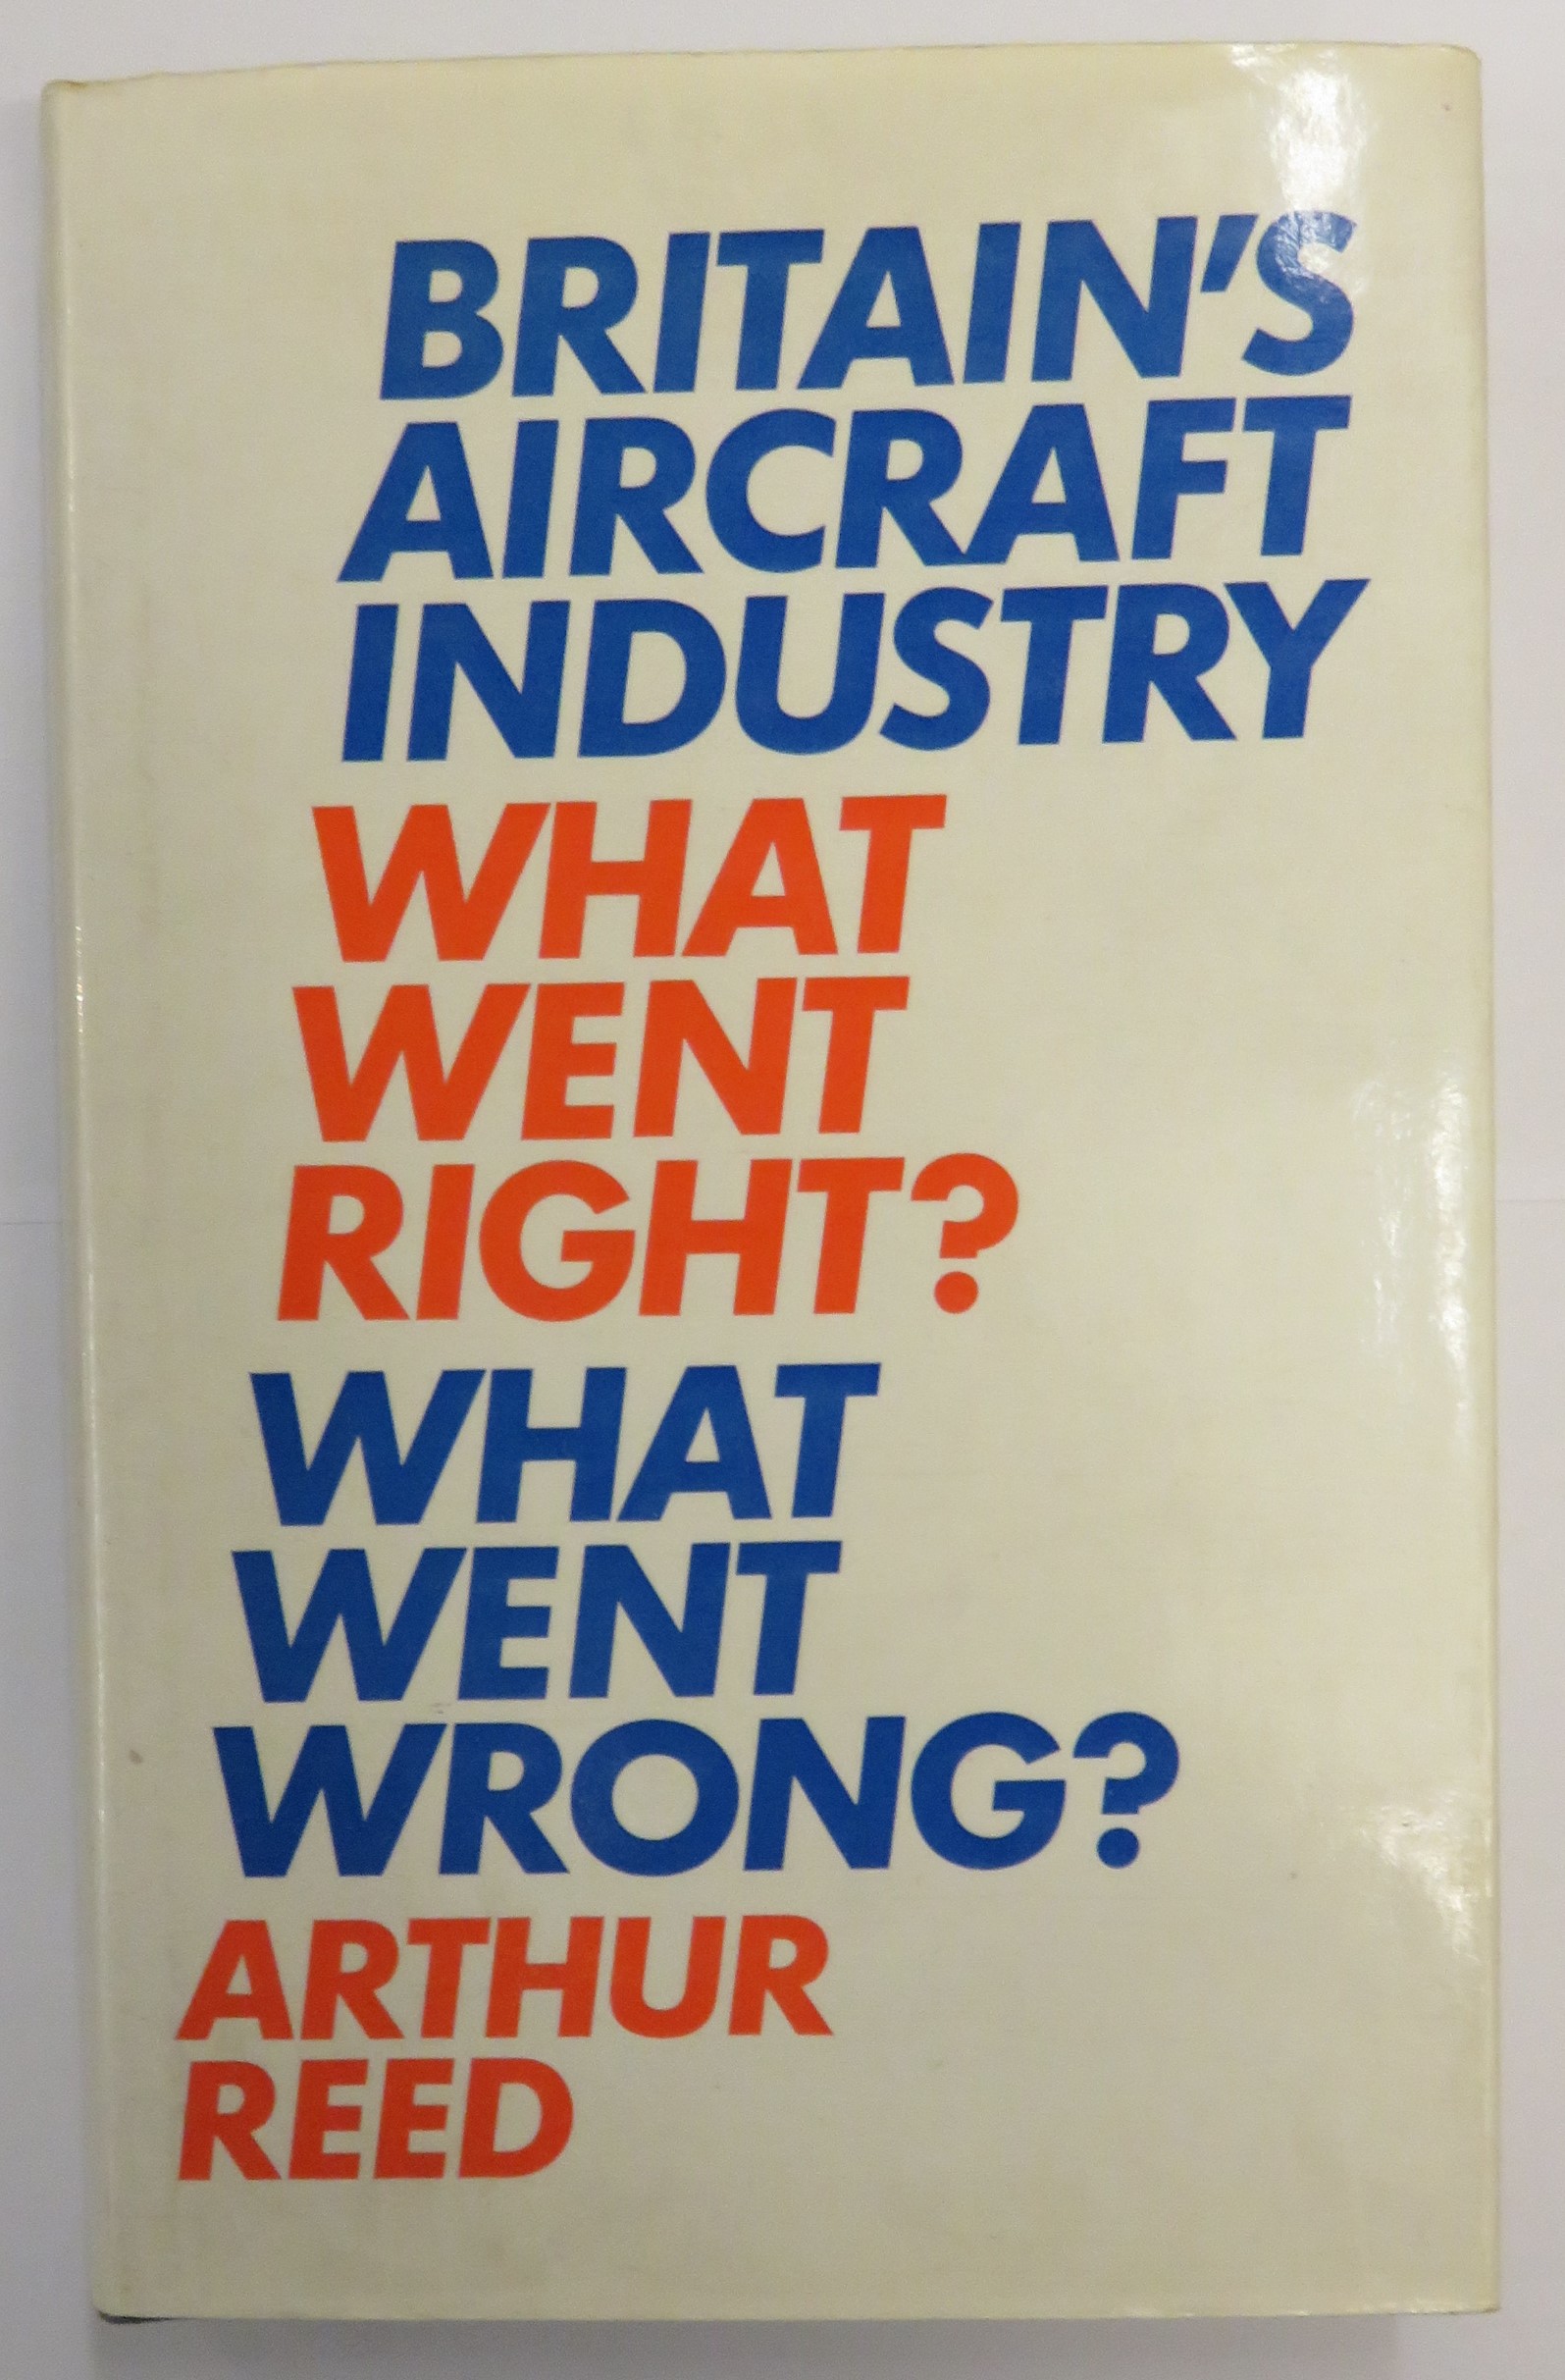 Britain's Aircraft Industry What Went Right? What Went Wrong?